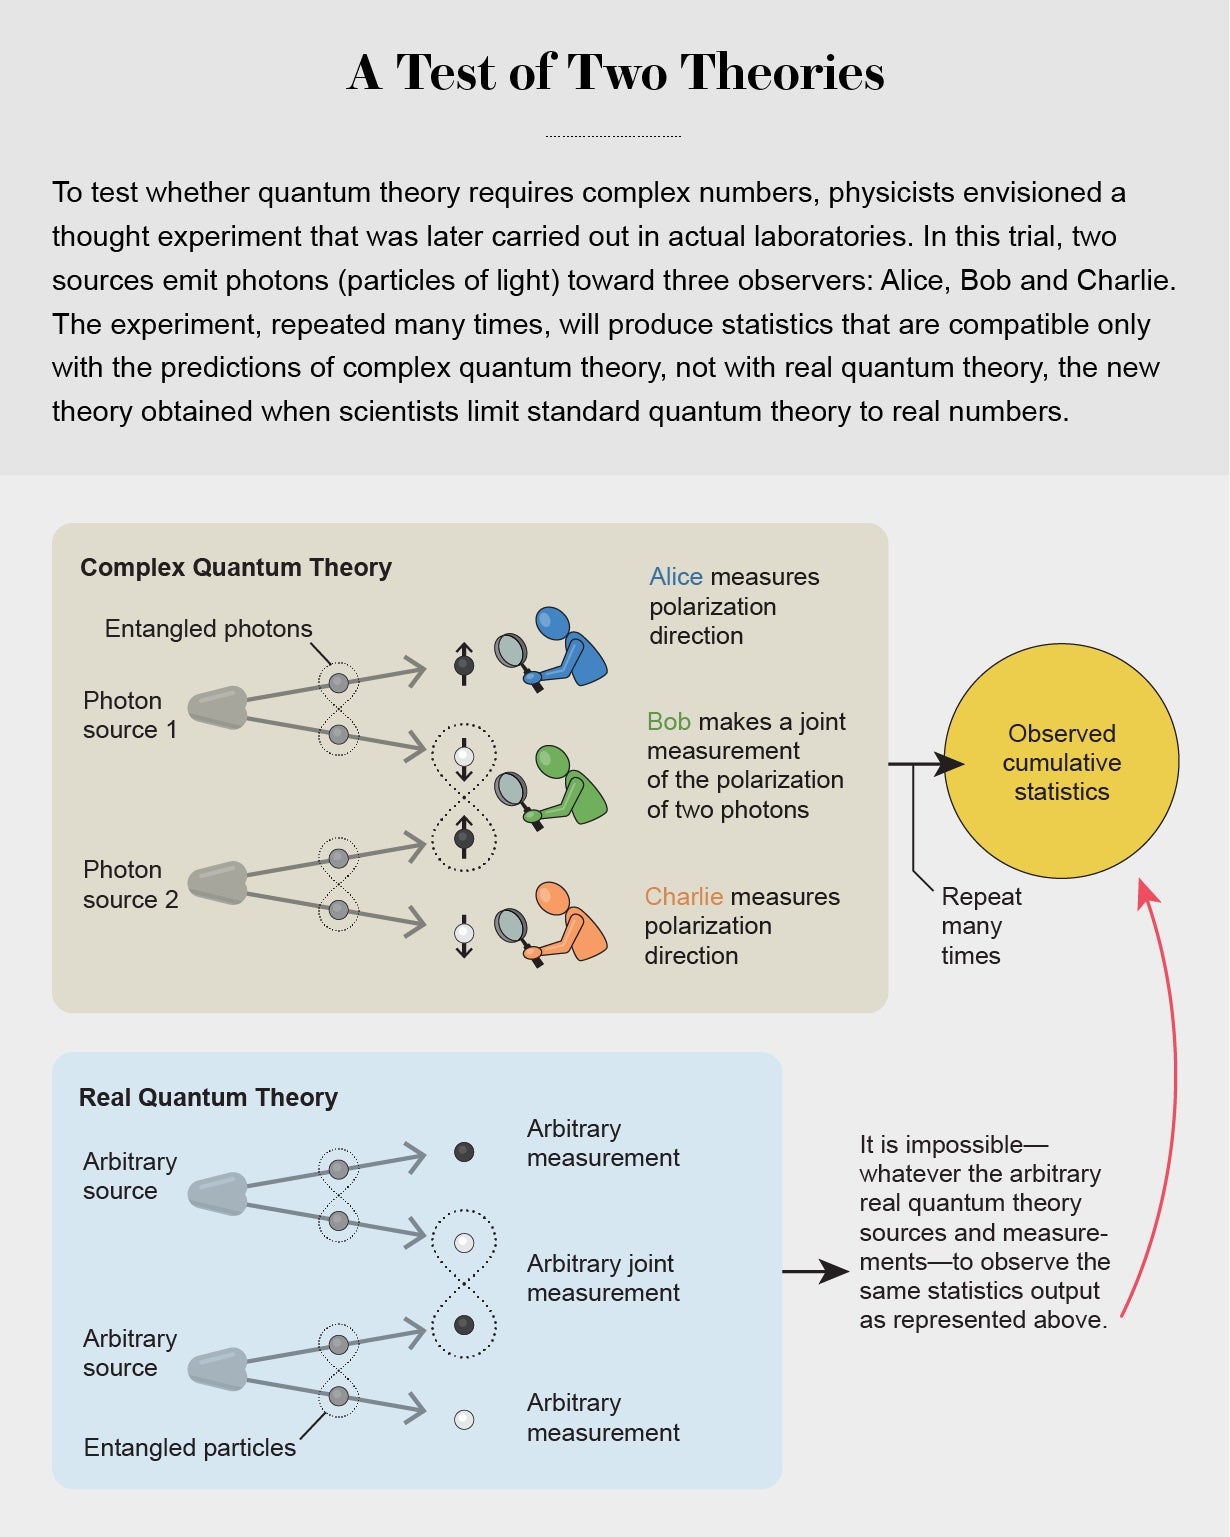 Graphic represents a thought experiment in which two sources emit particles toward three observers, who all measure polarization direction. The experiment, repeated many times, produces statistics that are compatible only with the predictions of complex quantum theory, not with real quantum theory.